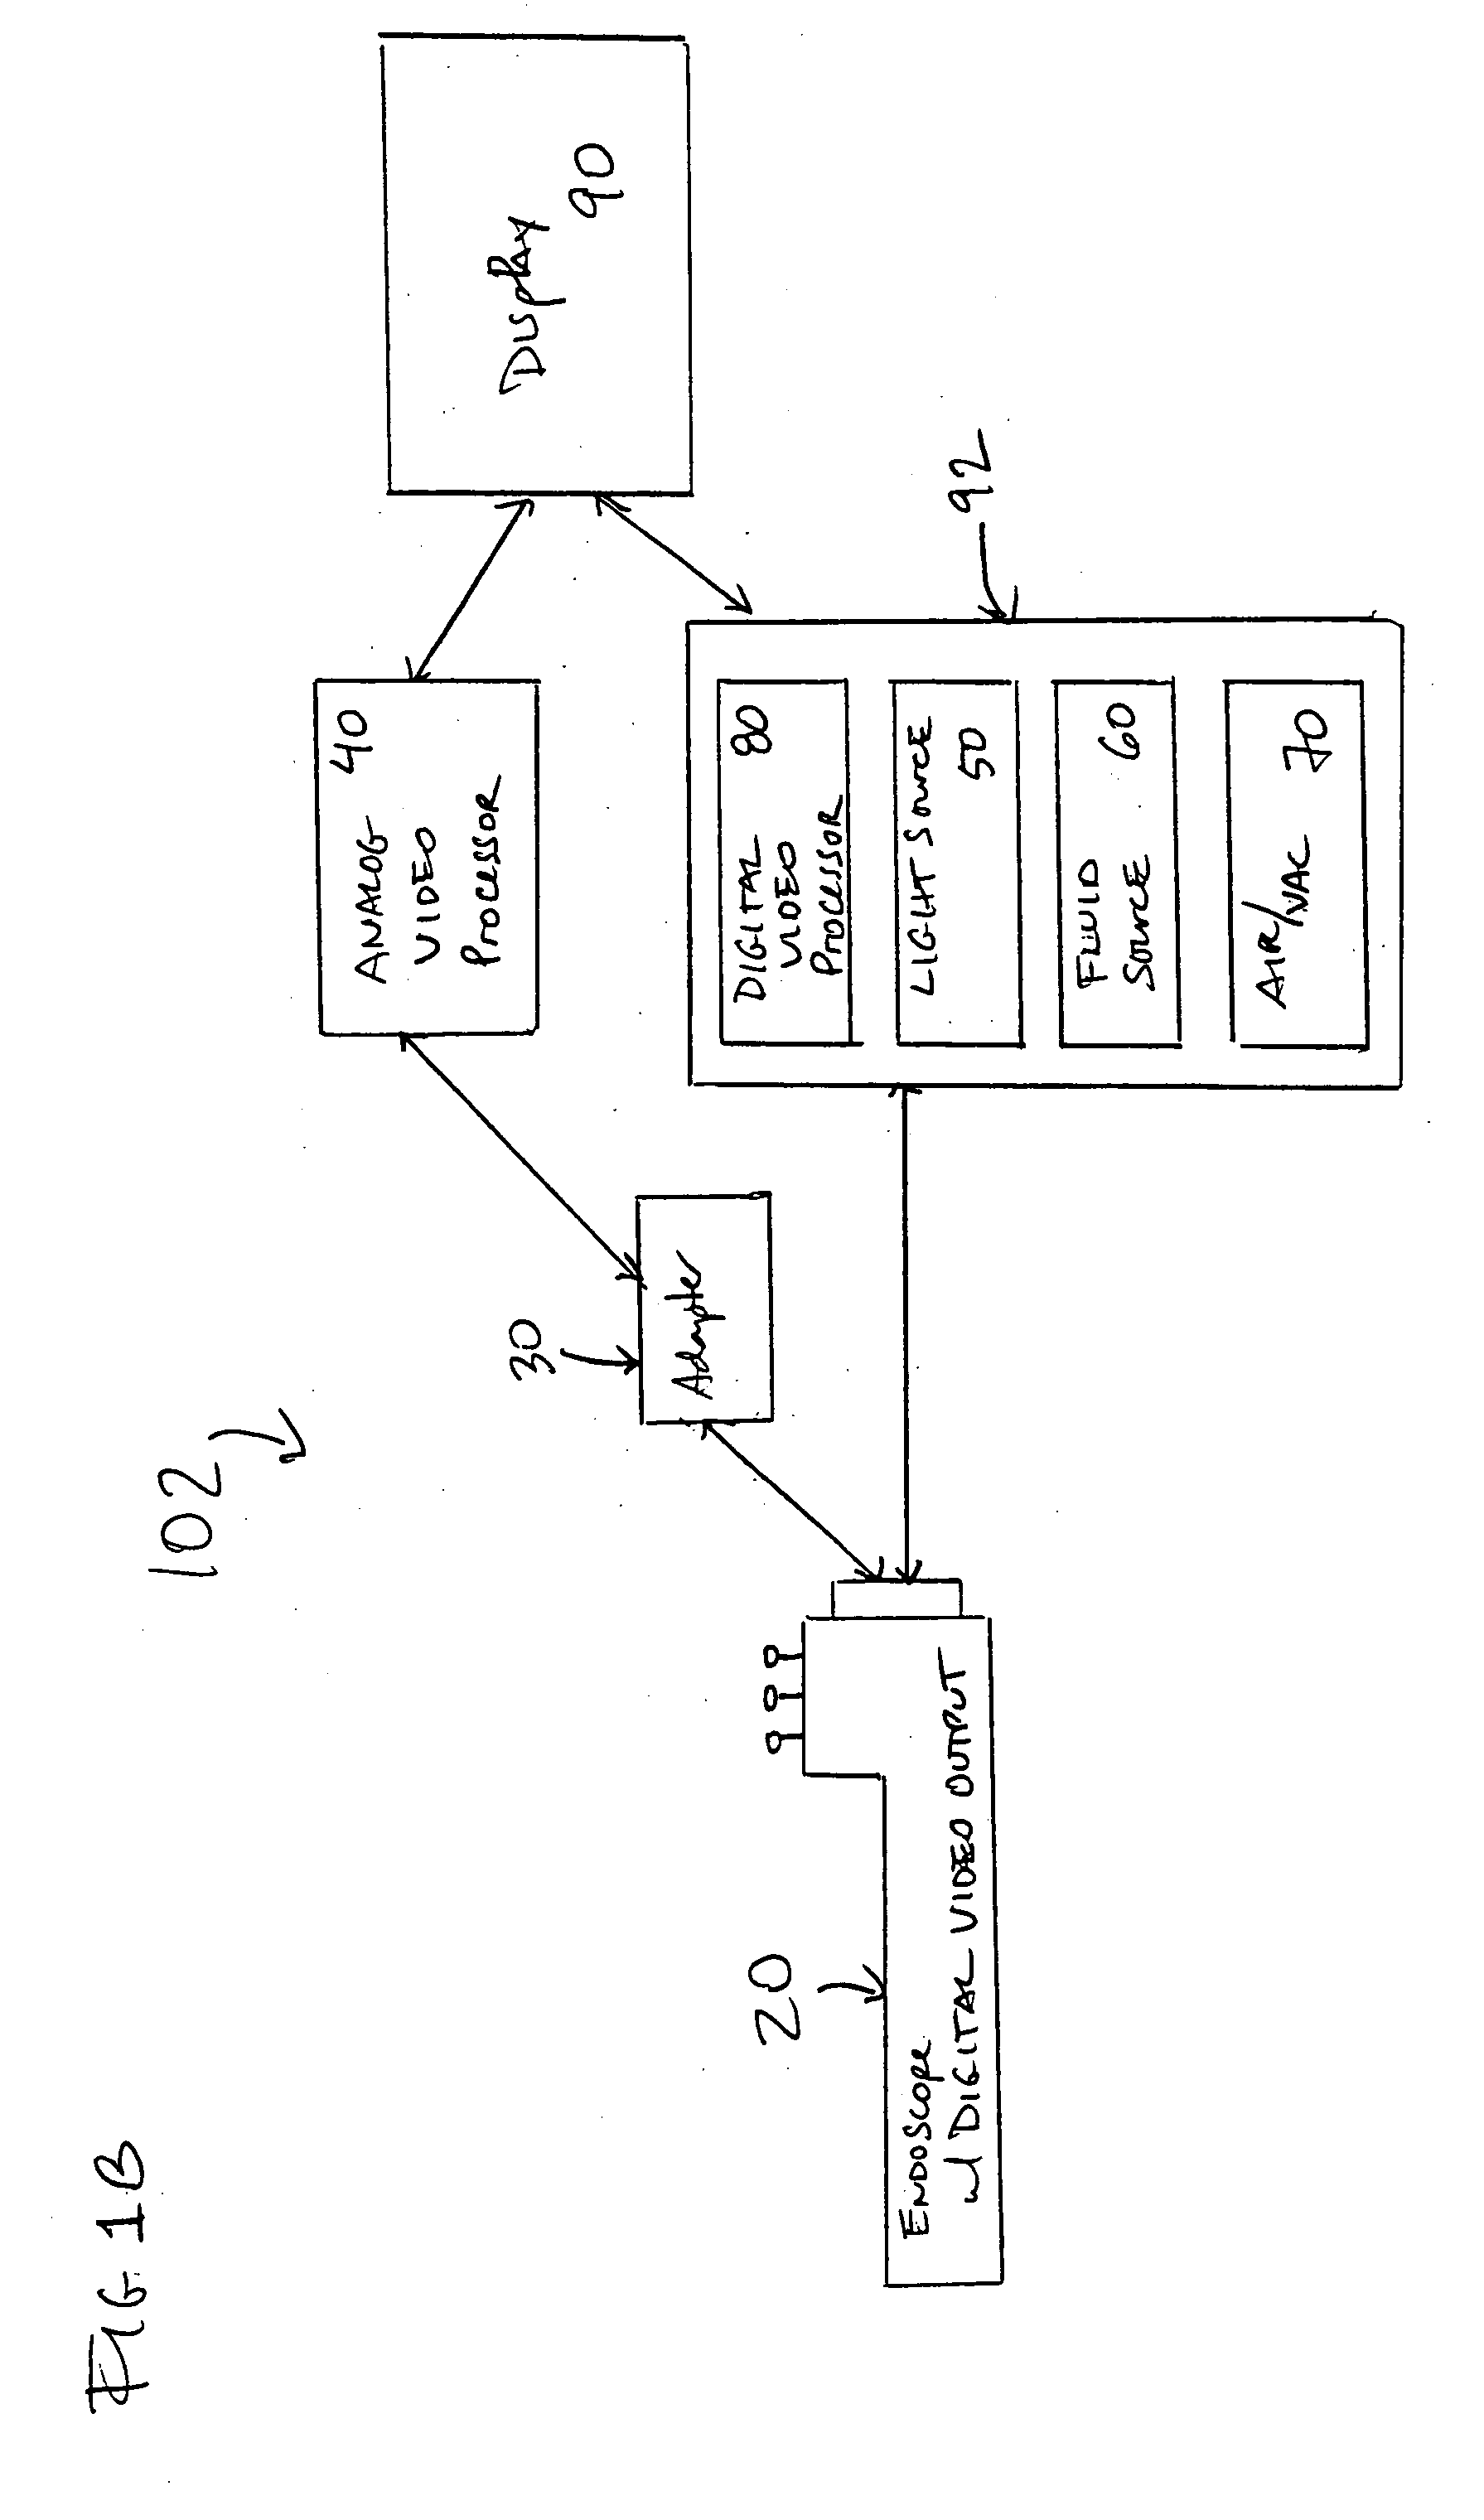 Adapter for use with digital imaging medical device